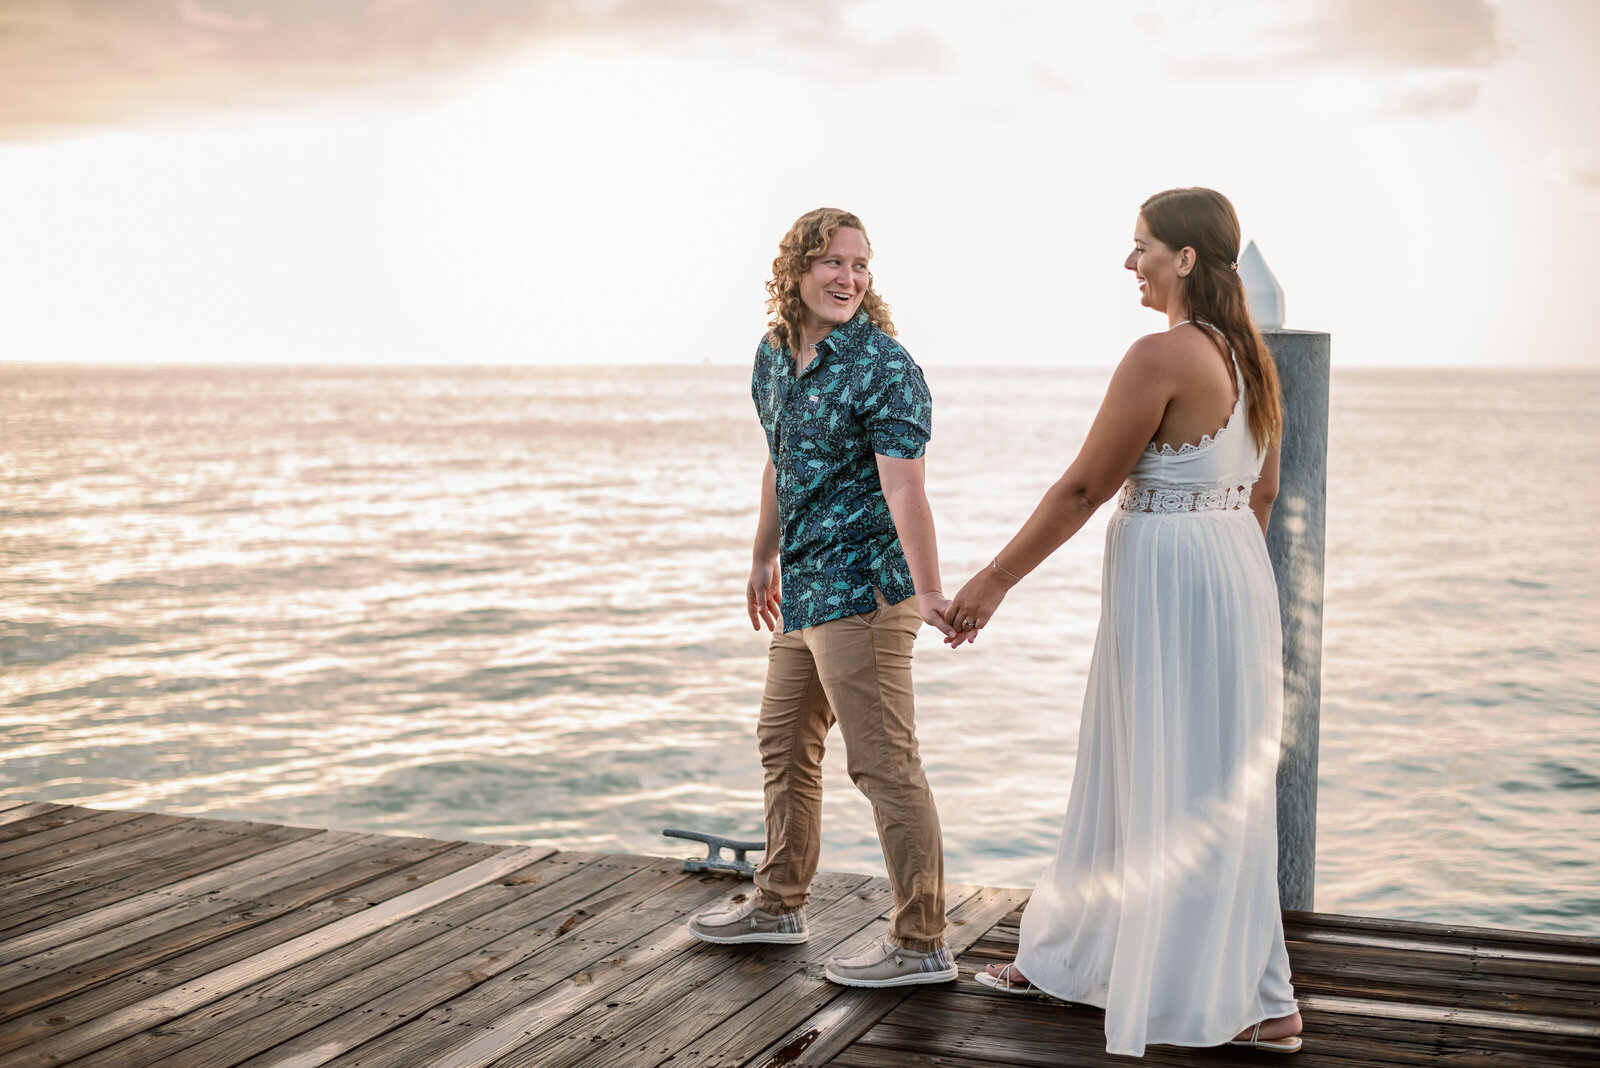 engaged lesbian couple walking on a boardwalk together as the sun is setting. One woman is leading the other while looking back at her and smiling